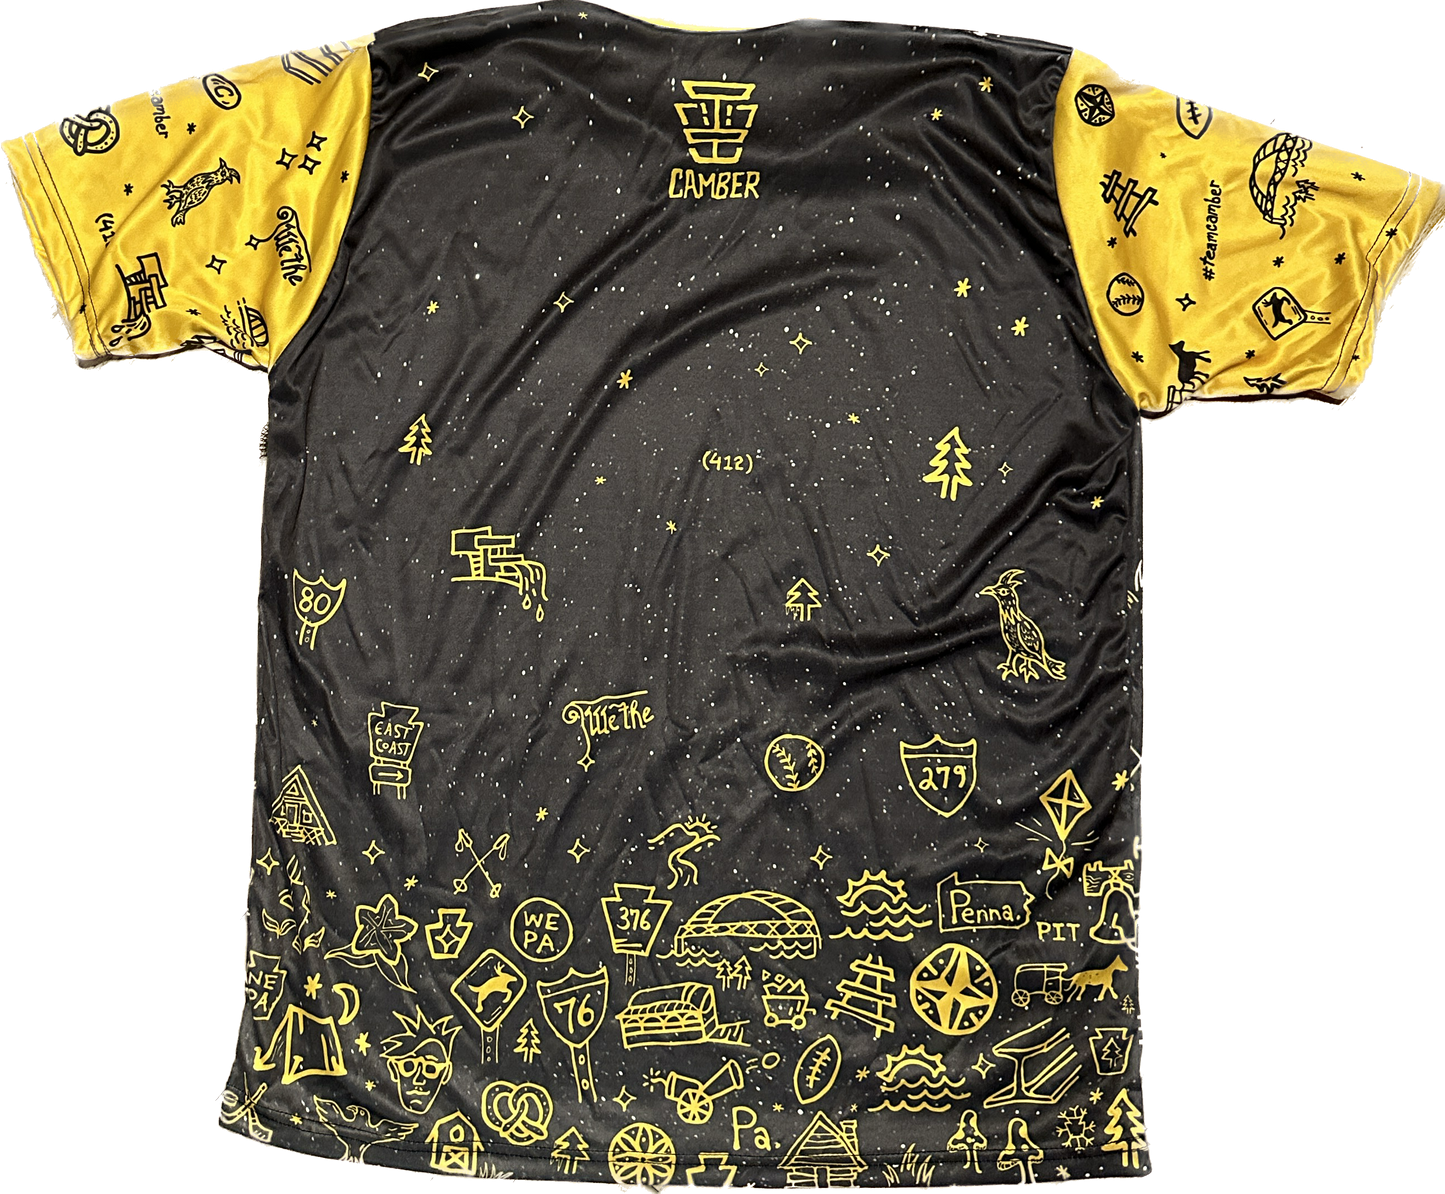 Camber Jersey- Black and Gold